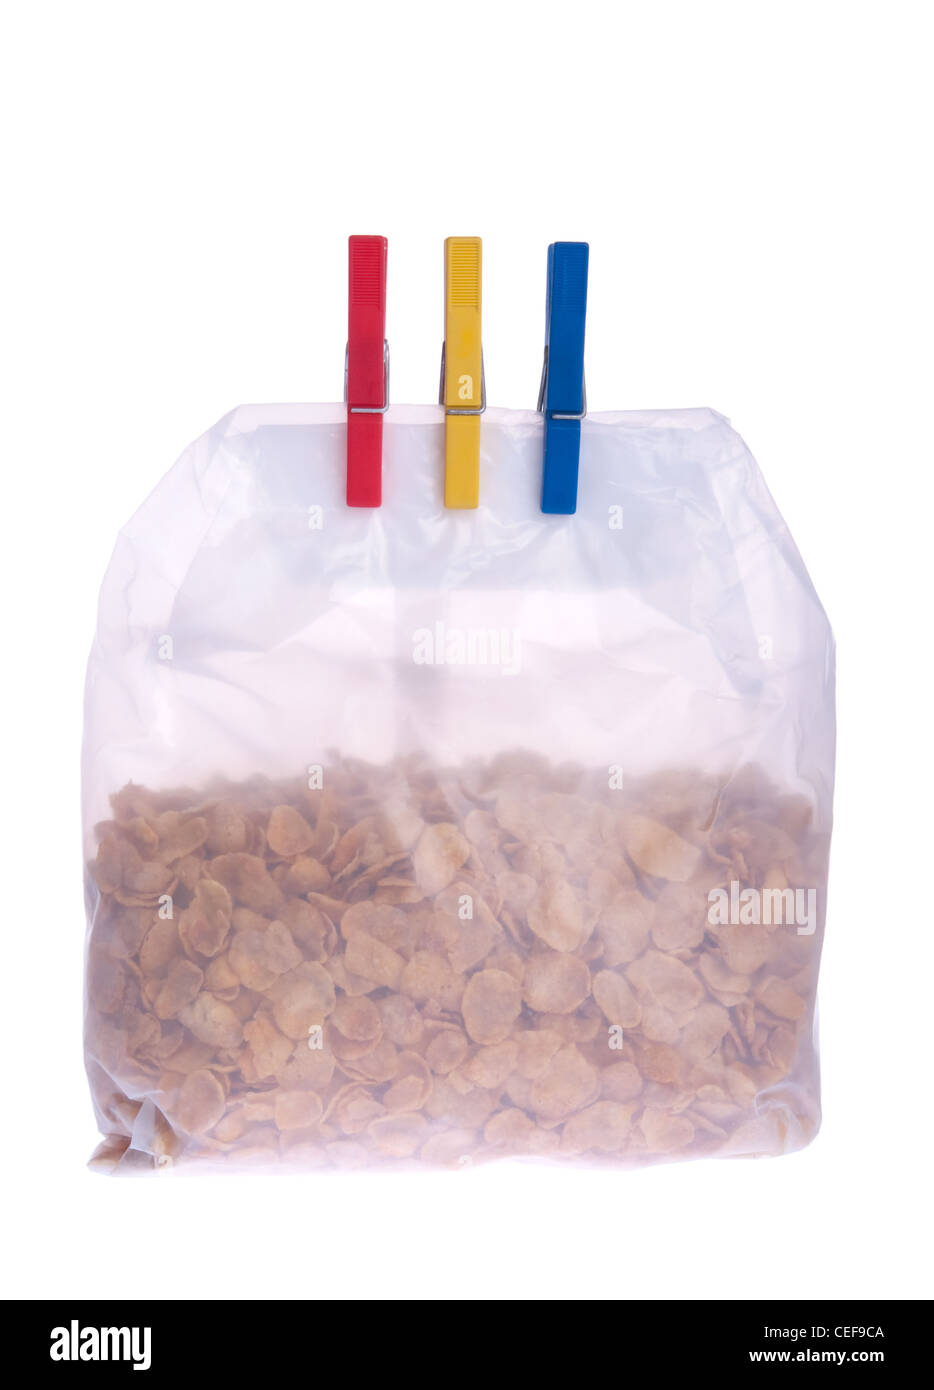 Cornflakes bag with clothes pegs Stock Photo